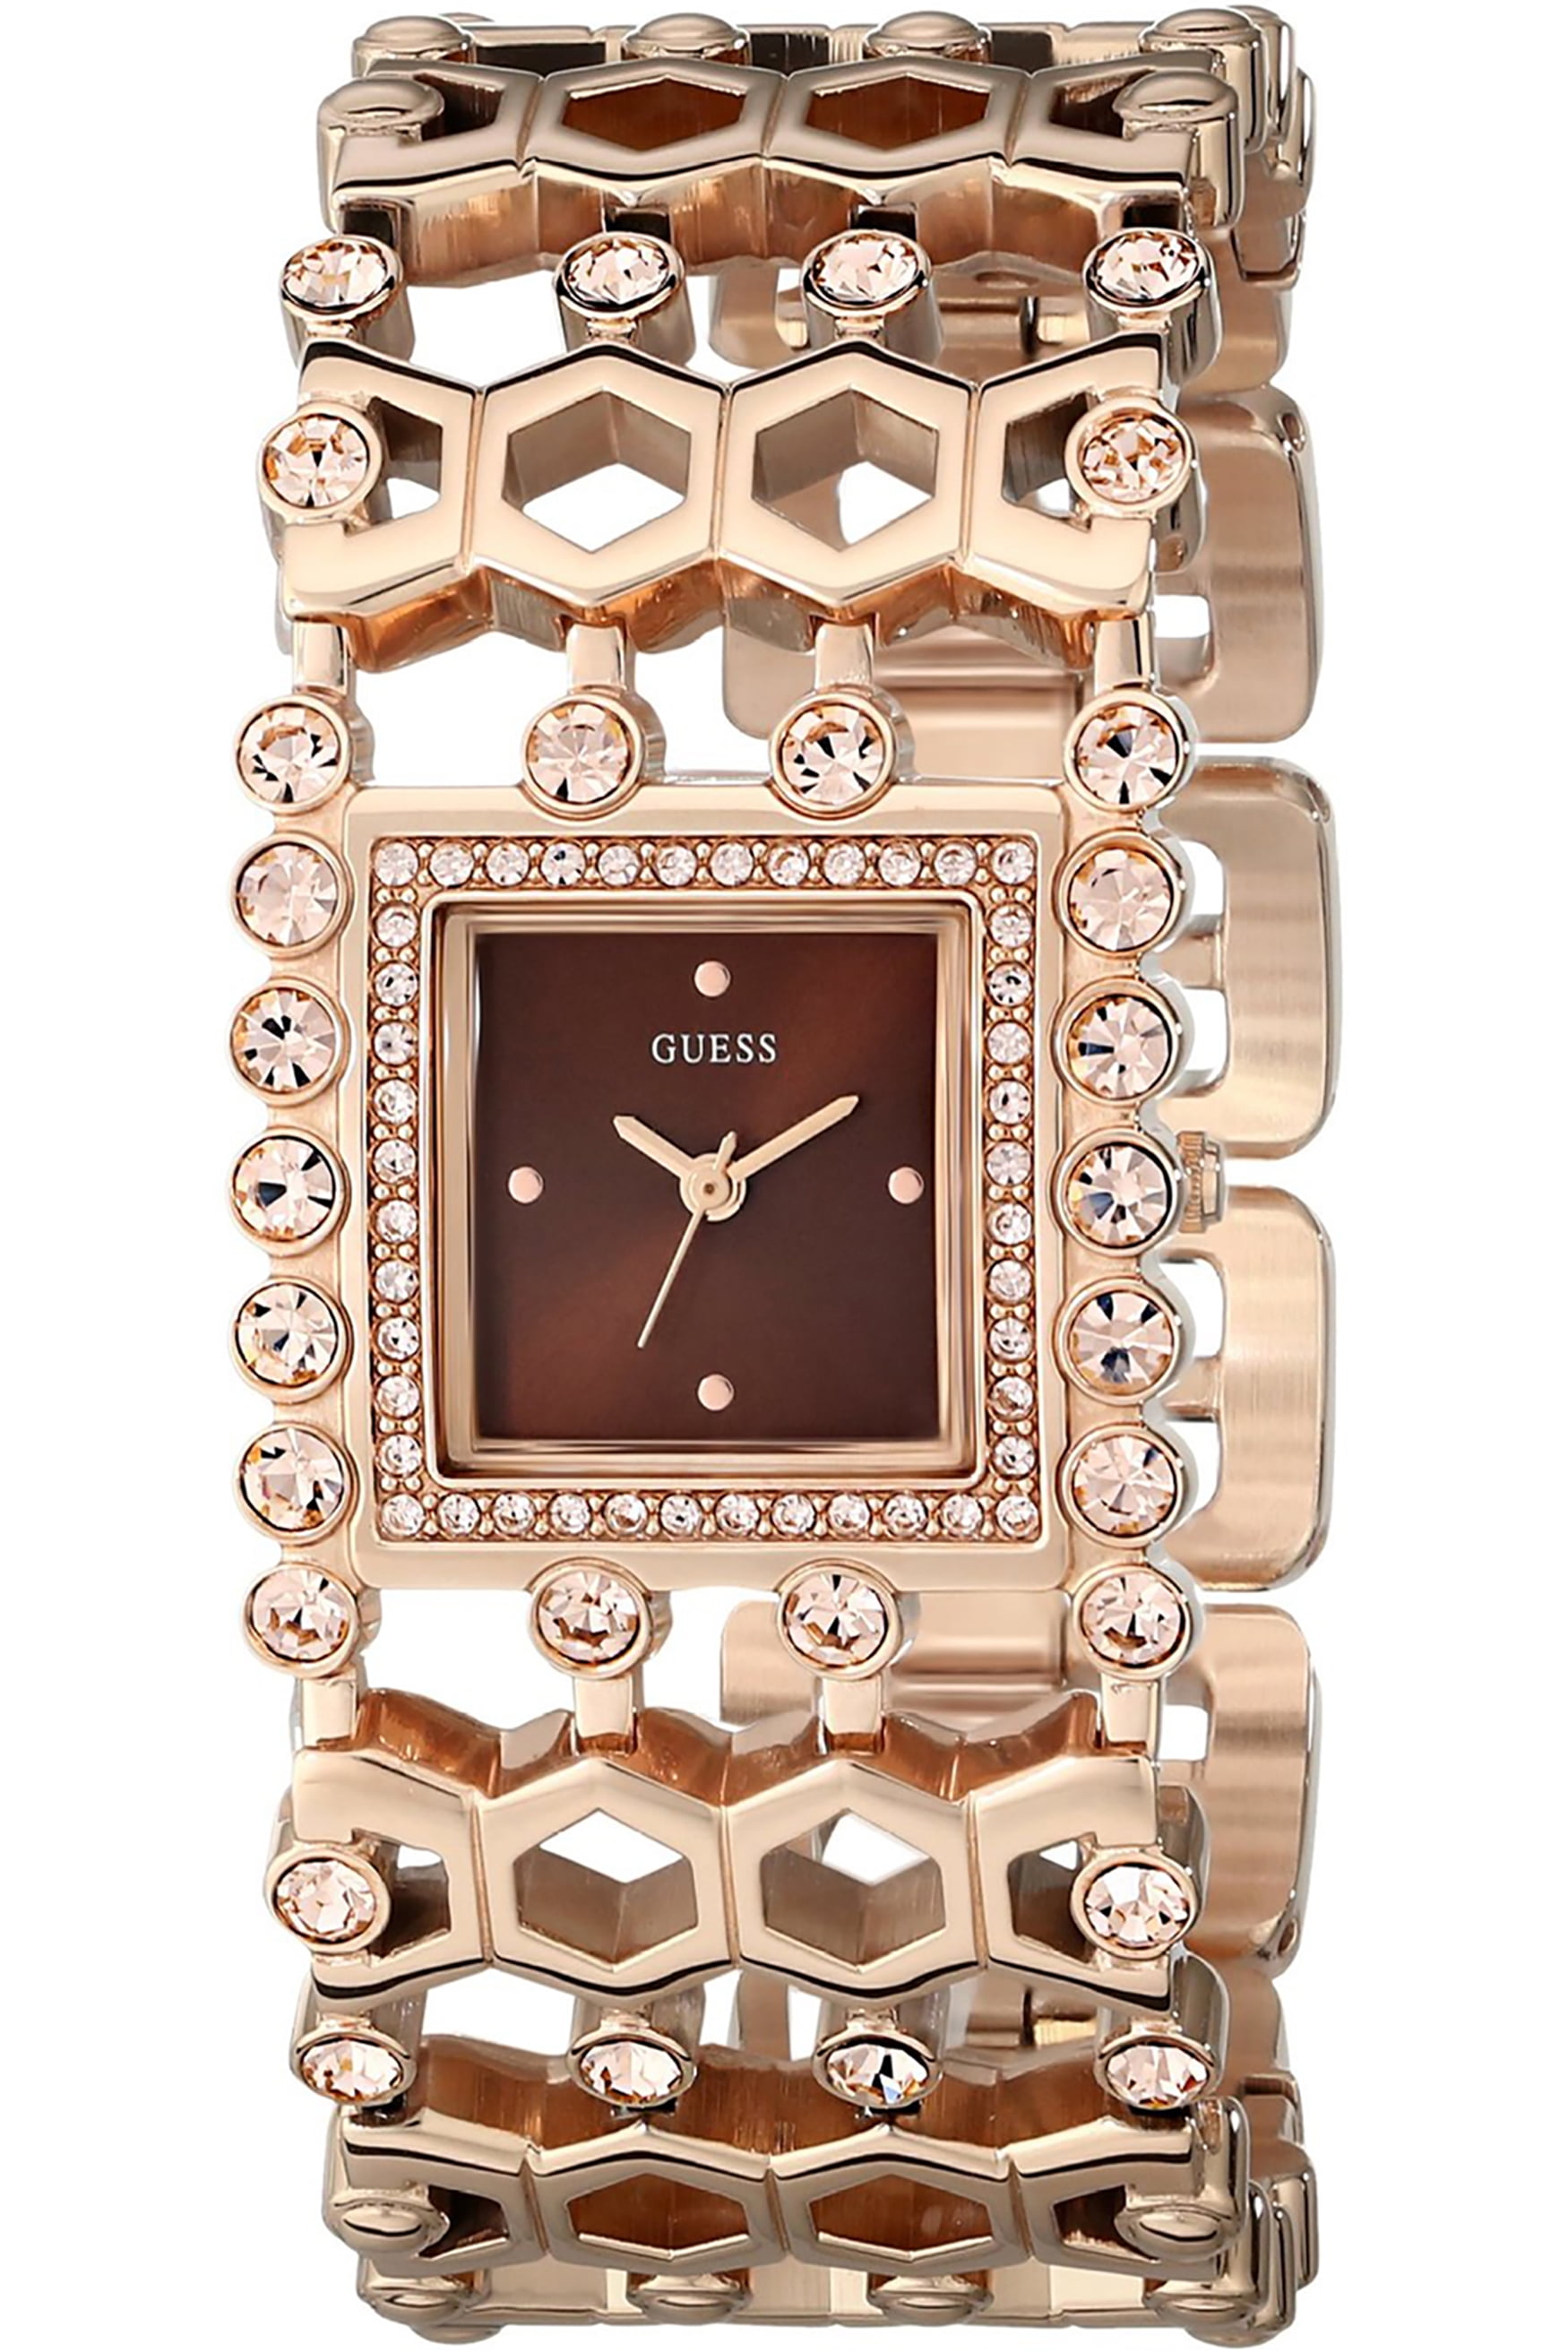 GUESS Ladies Gold Tone Analog Watch - GW0474L2 | GUESS Watches US